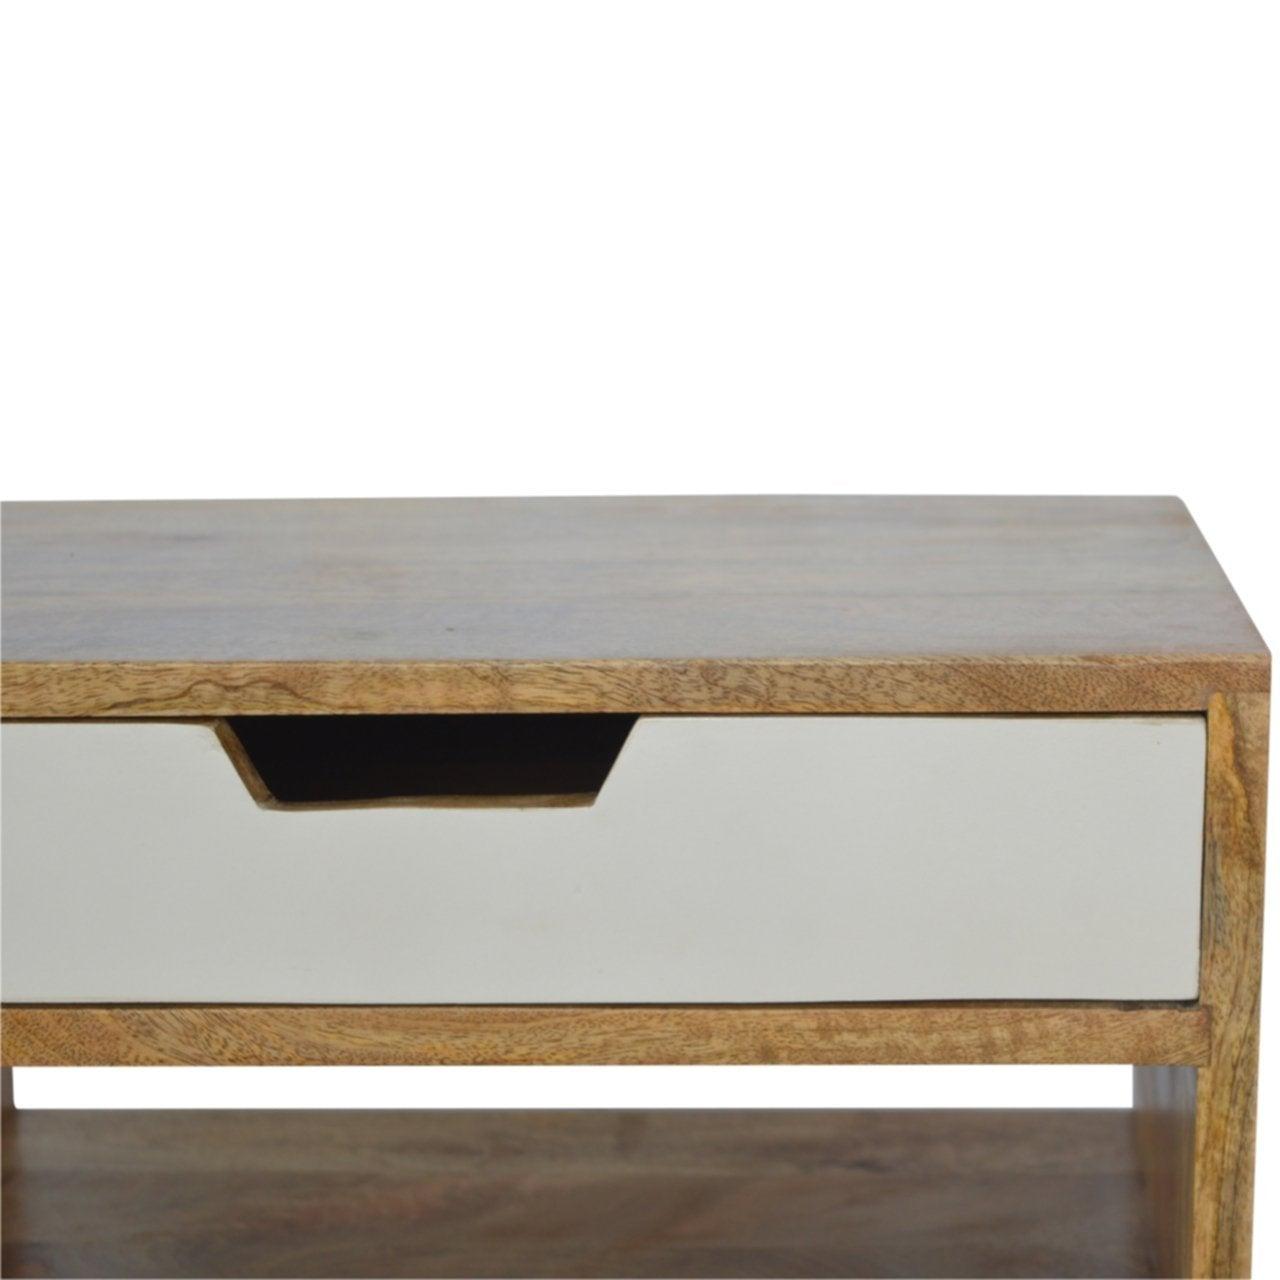 Grey and white cut-out bedside table - crimblefest furniture - image 6